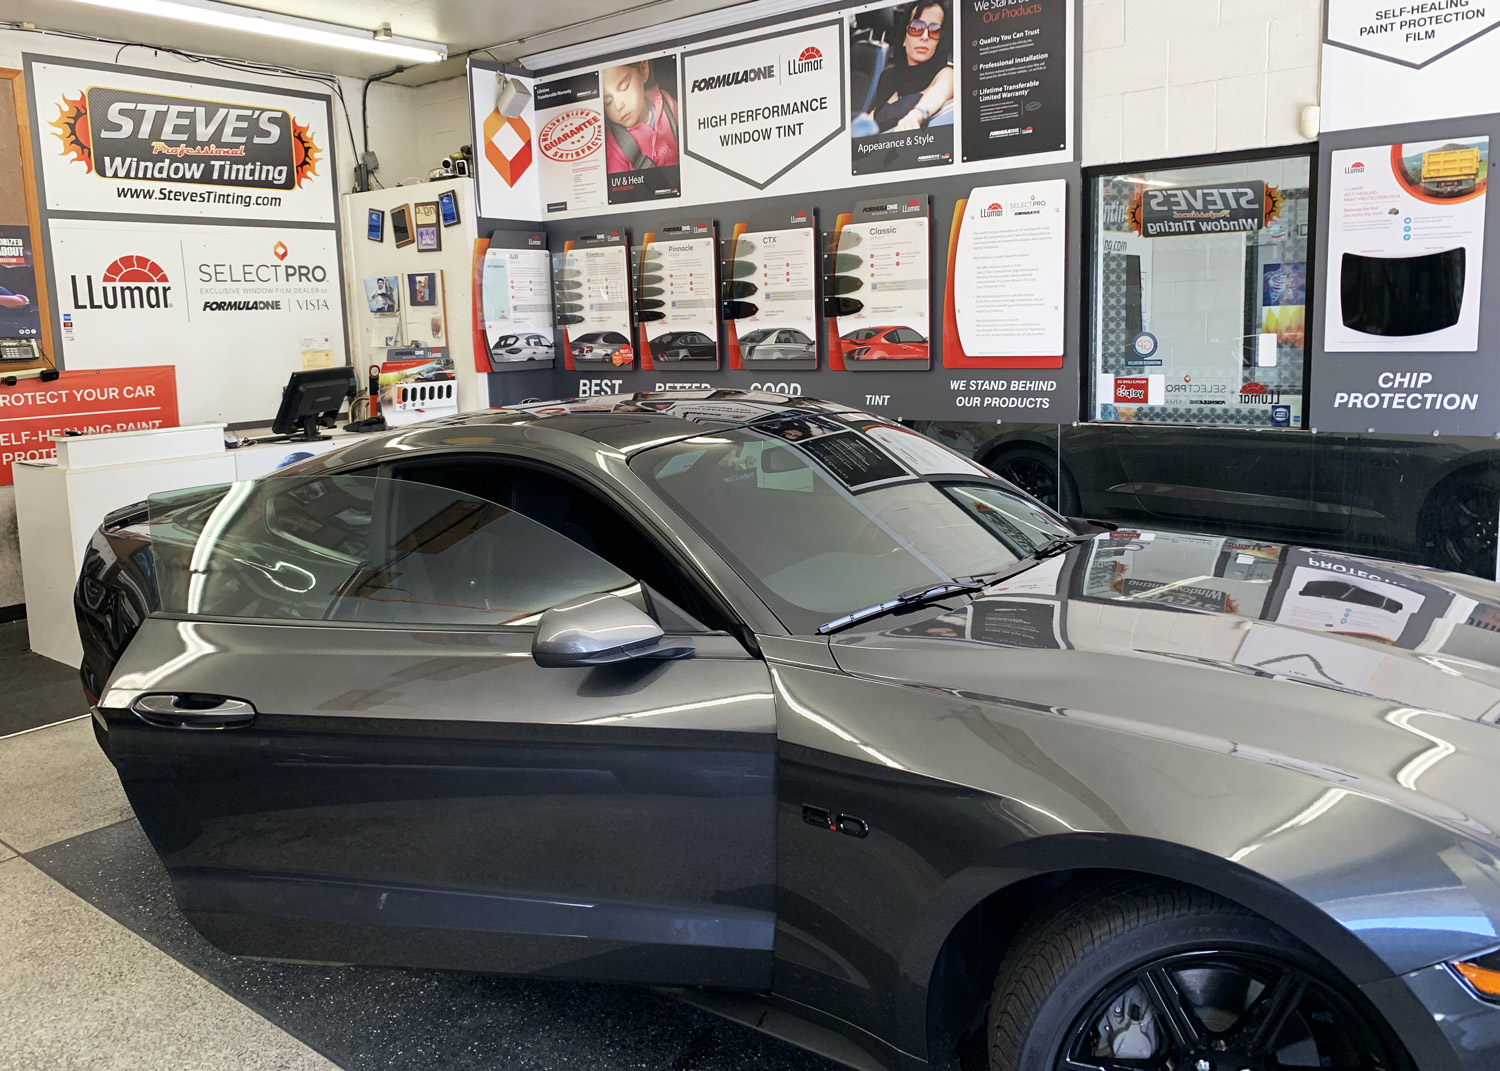 Ford Mustang with sun protection window tint